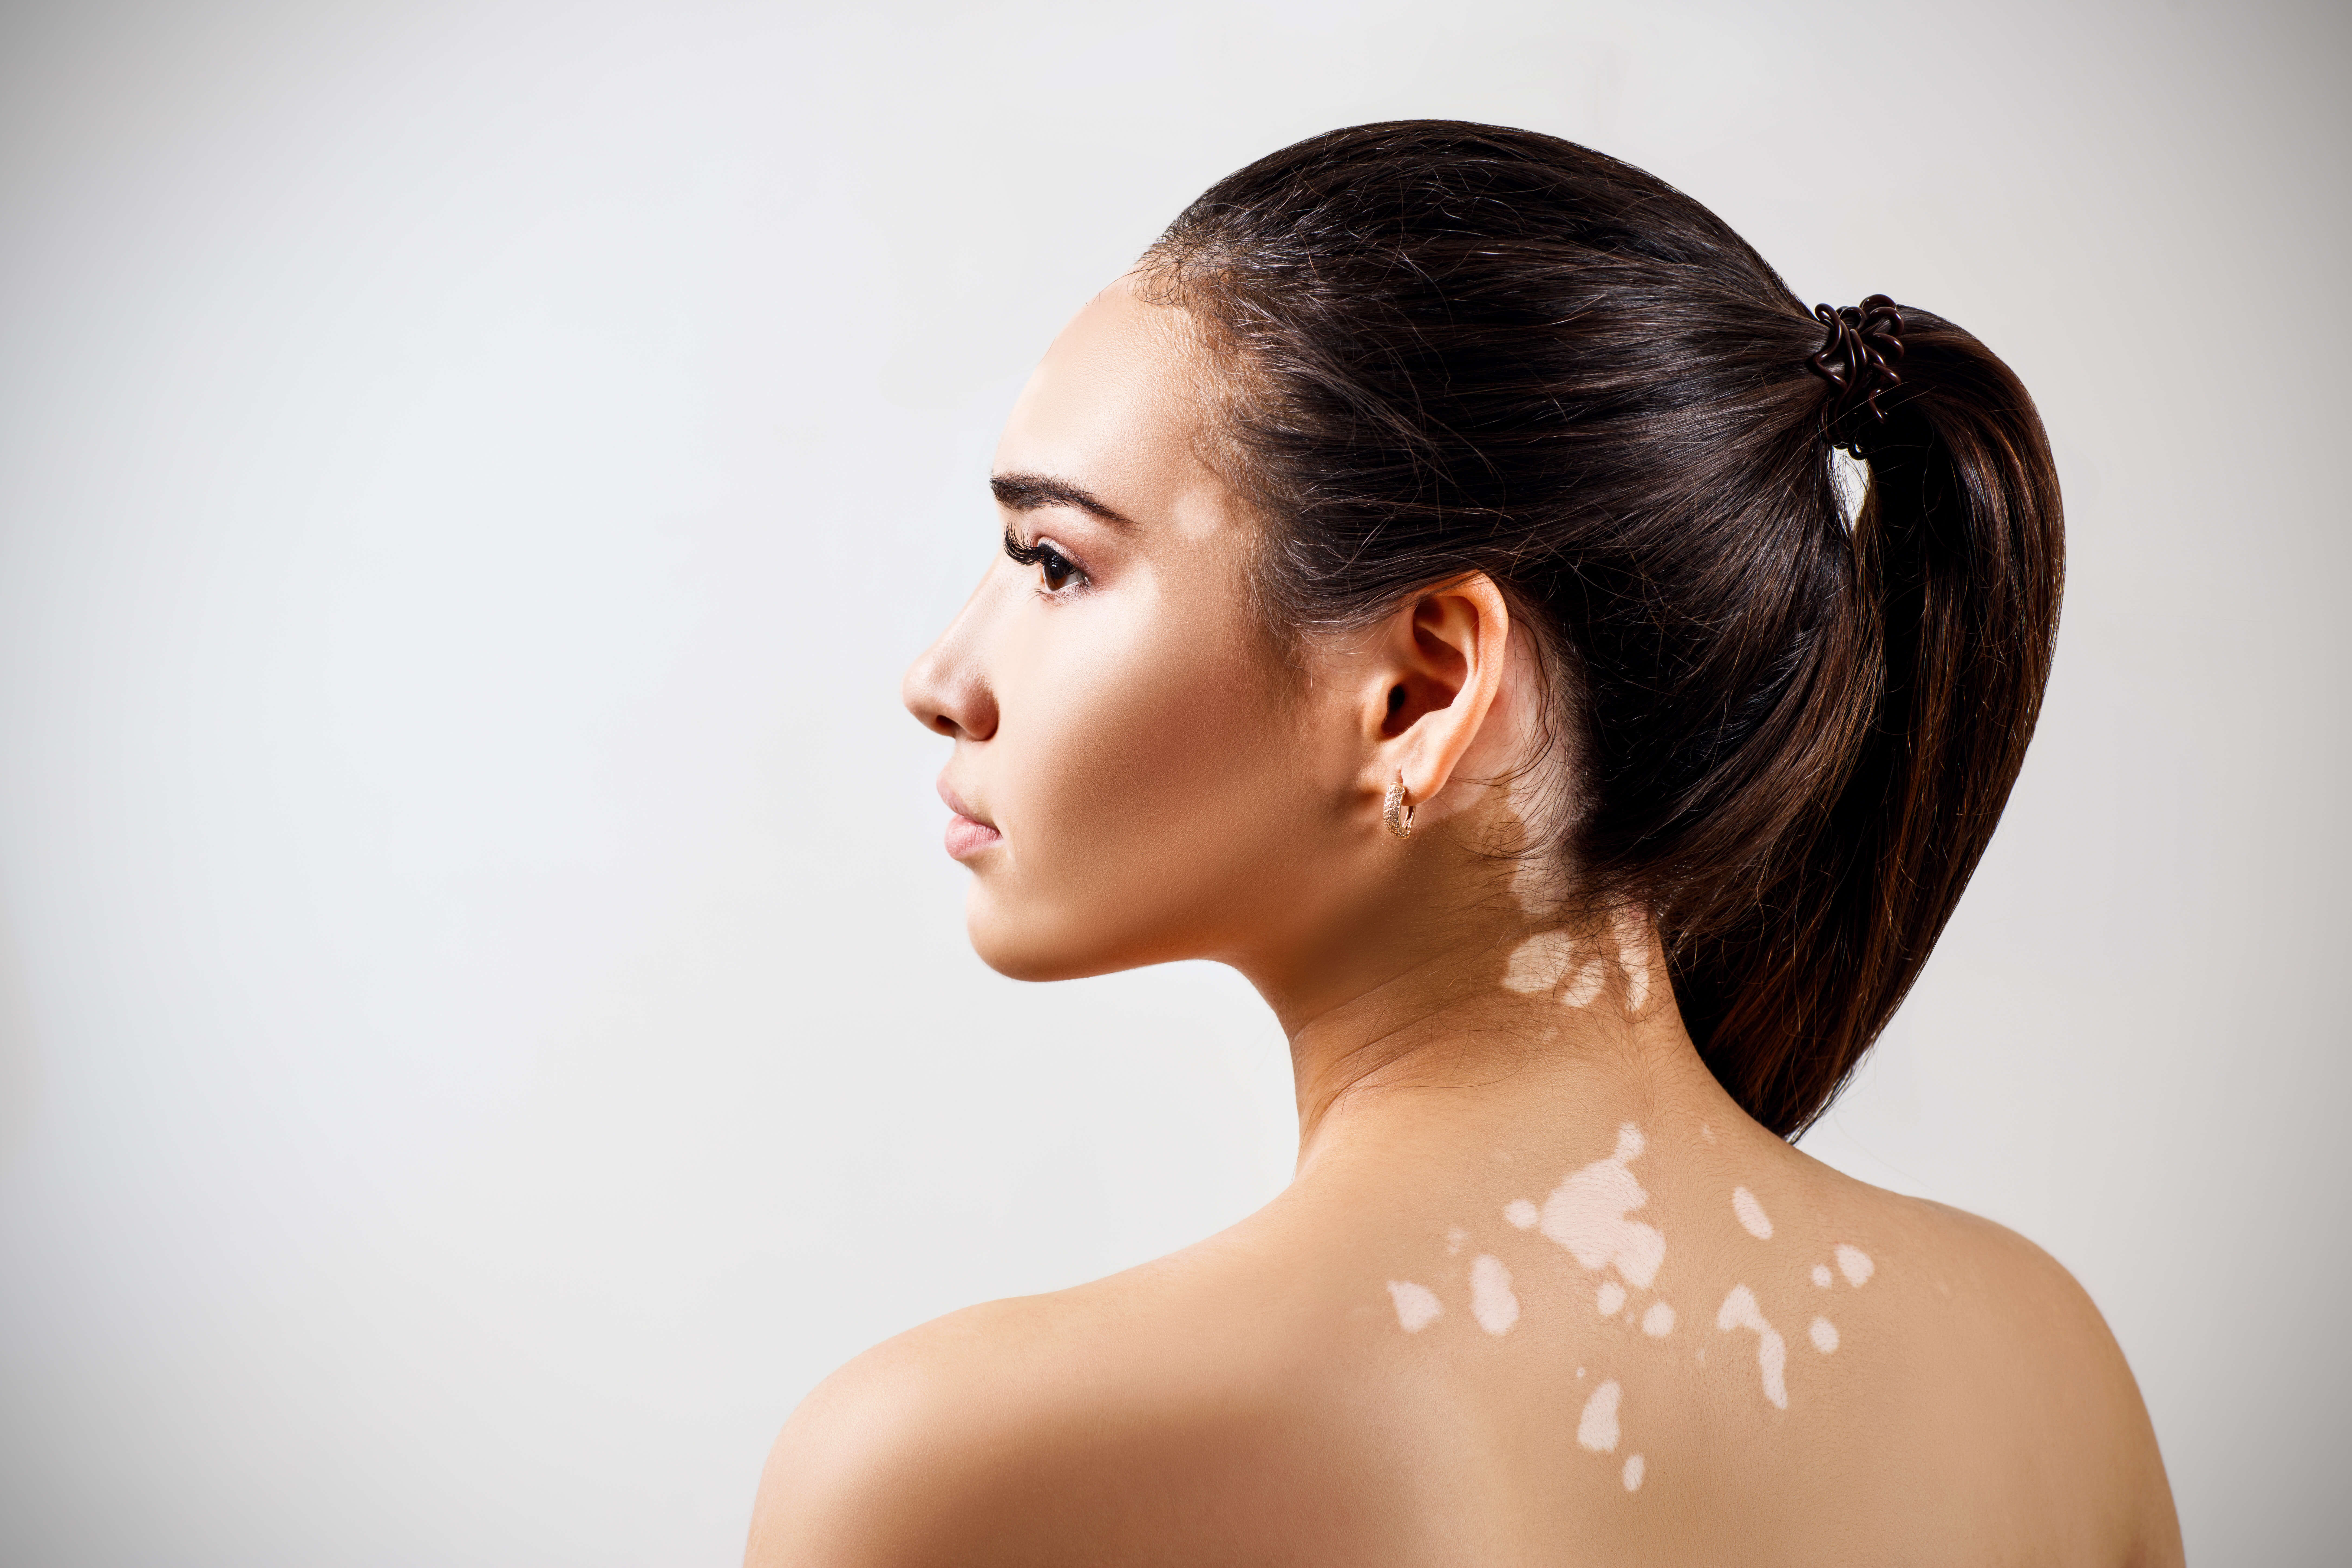 What Is Vitiligo, And How Does It Occur